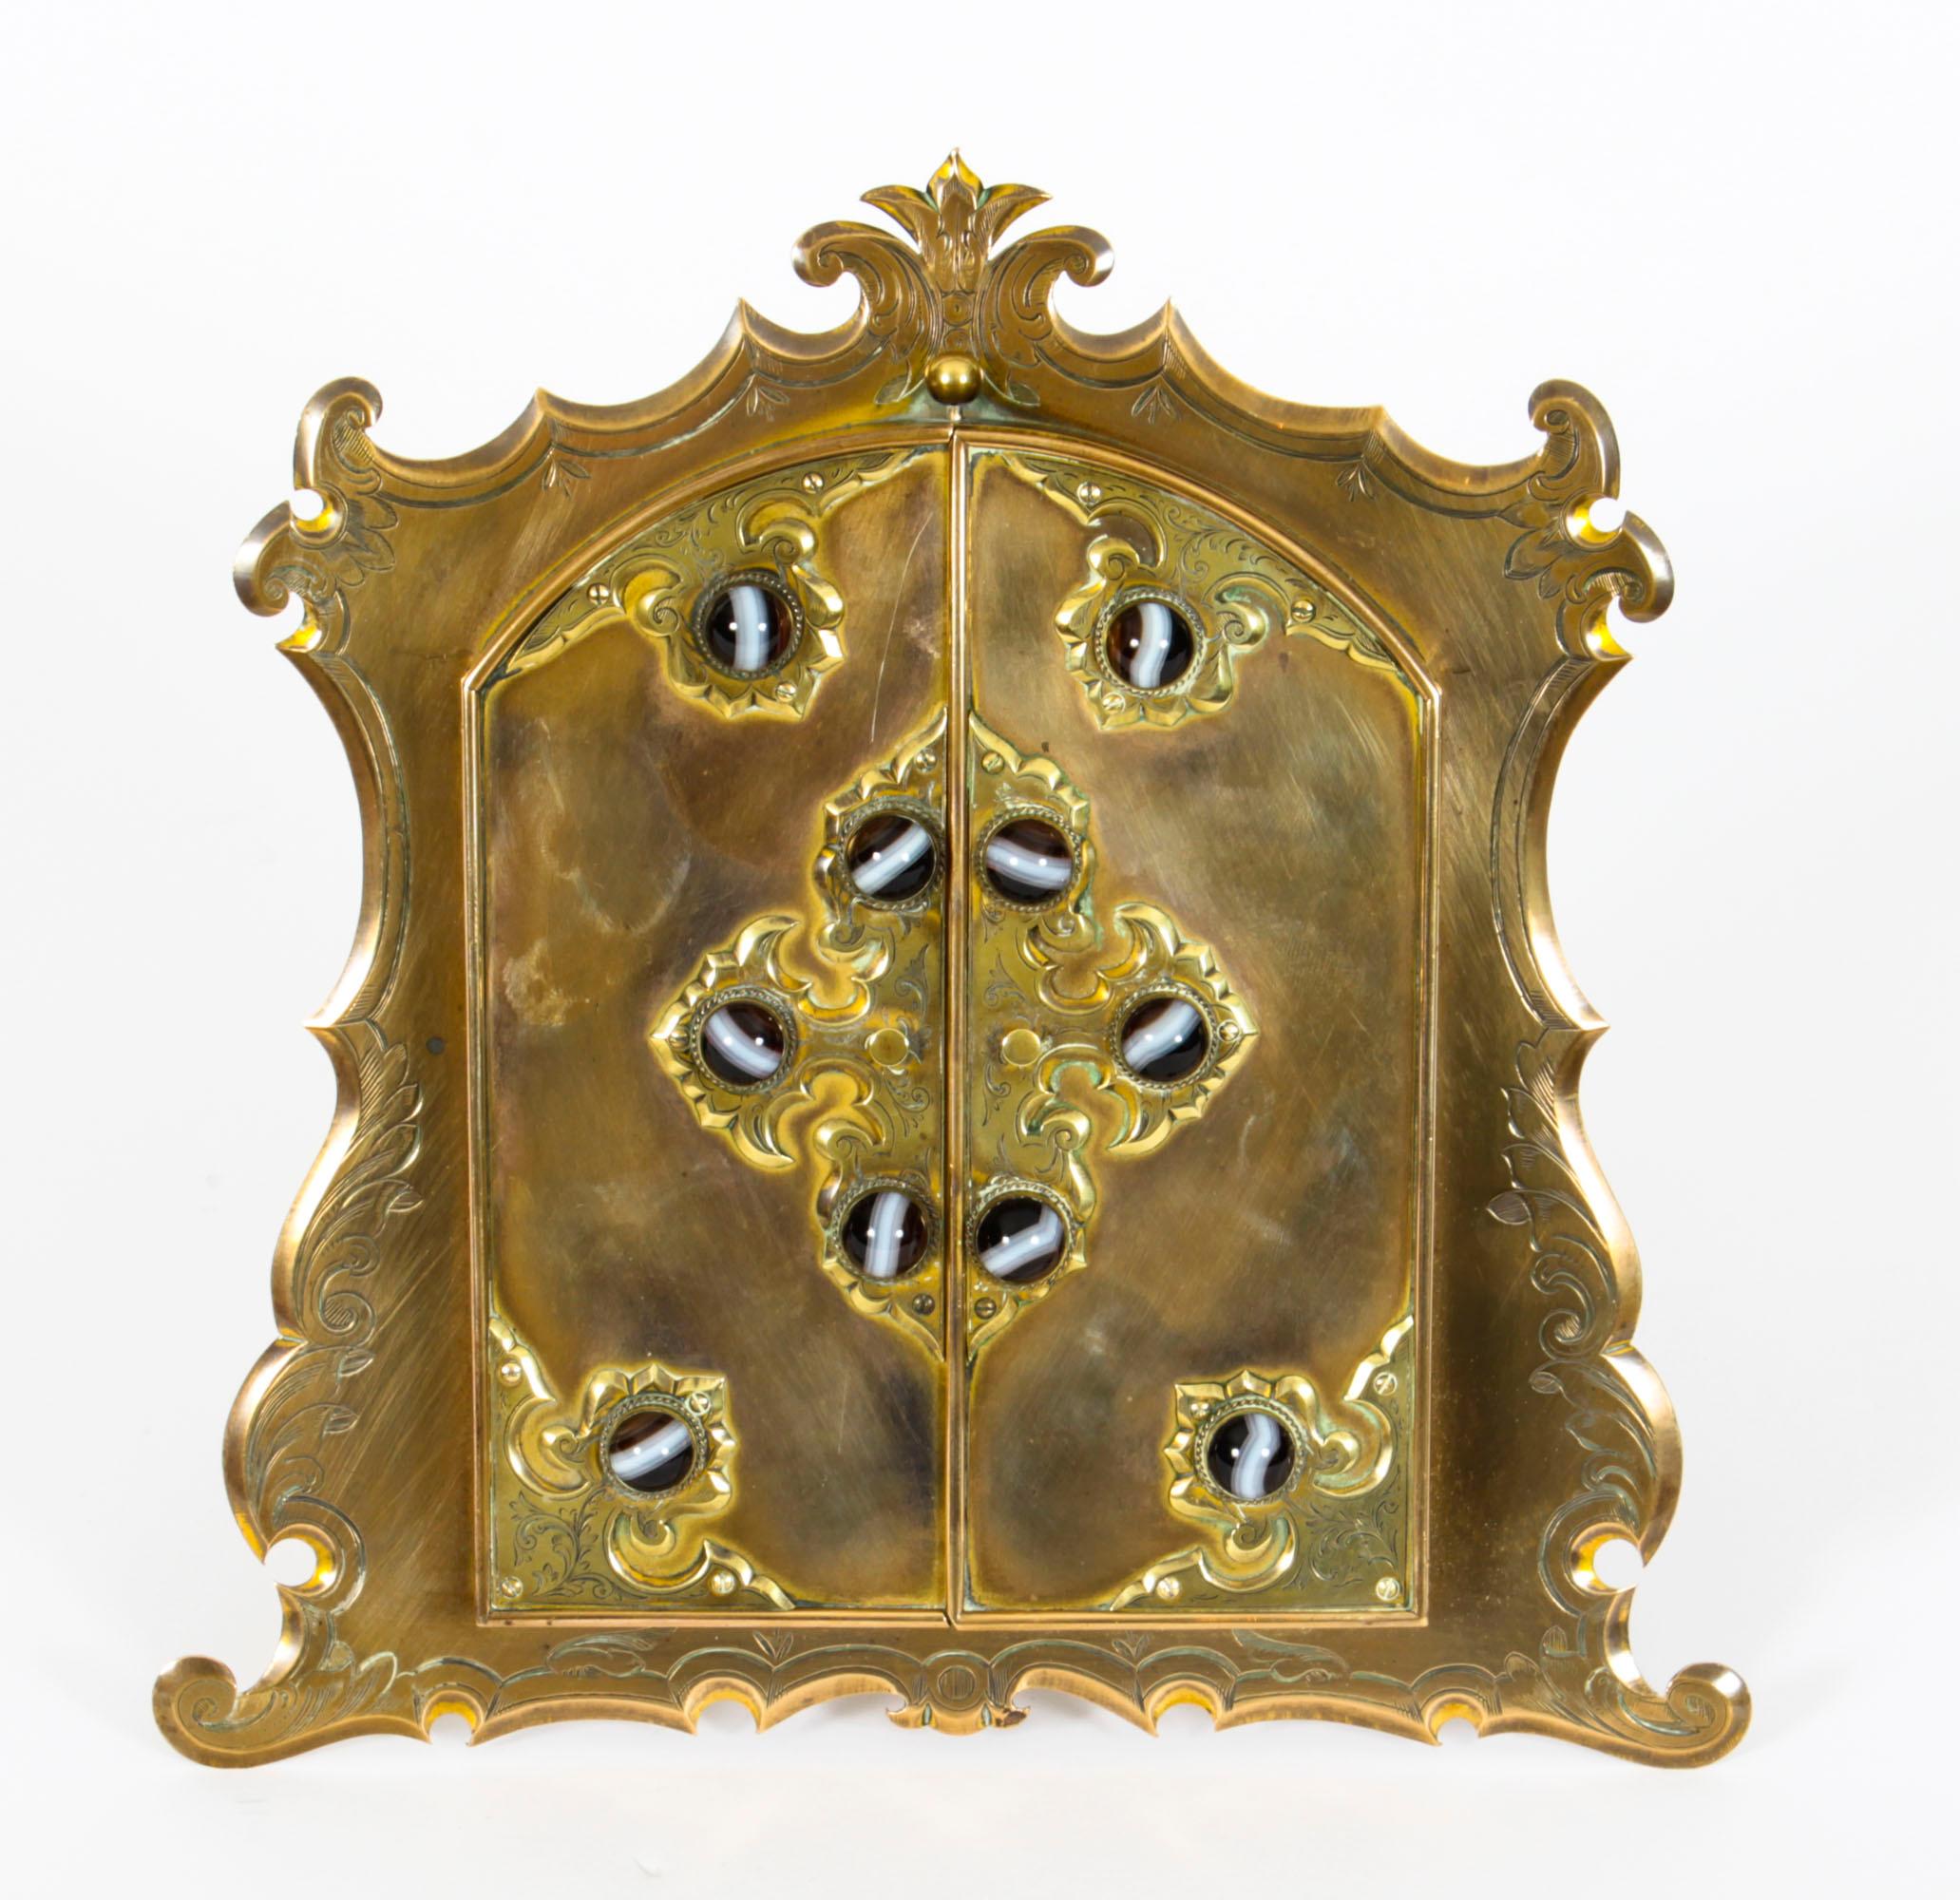 This is a beautiful antique ormolu and agate mounted easel photograph frame, circa 1880 in date.
 
The arched backplate features a wavy edge border having a pair of spring loaded arched doors enclosing five ovals for miniatures or photographs.
